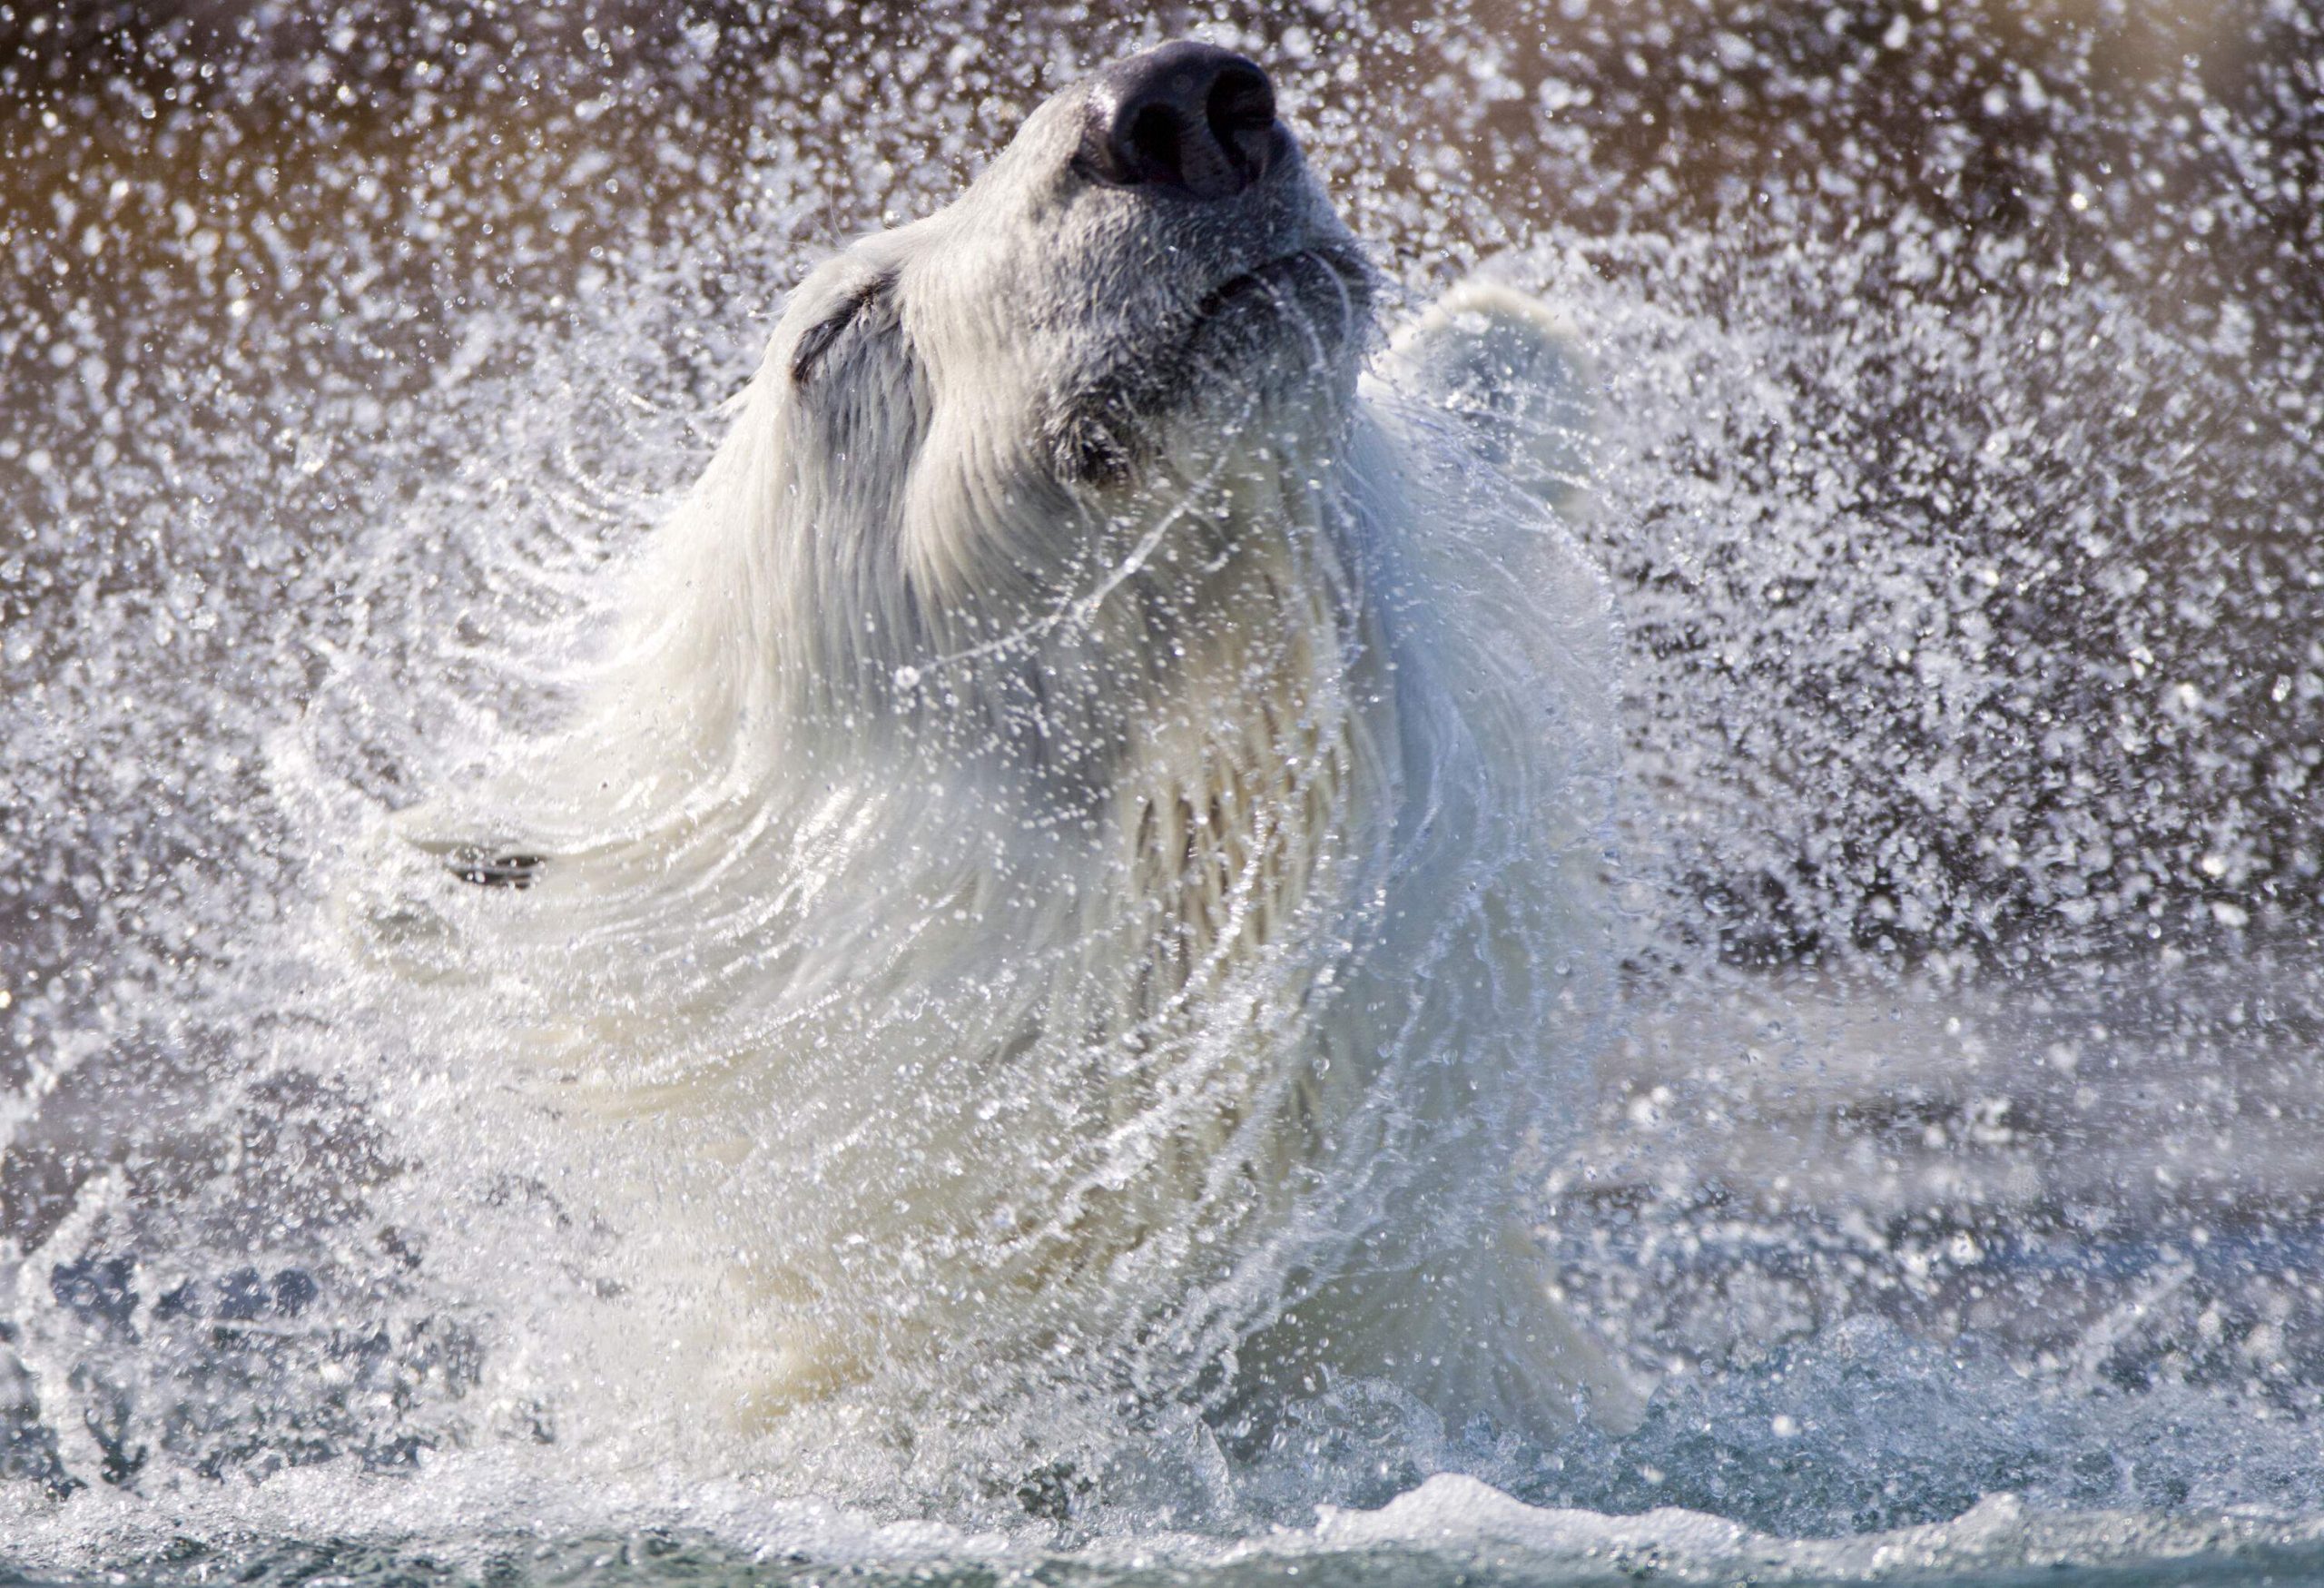 A polar bear shaking water off of its body, creating splashes.